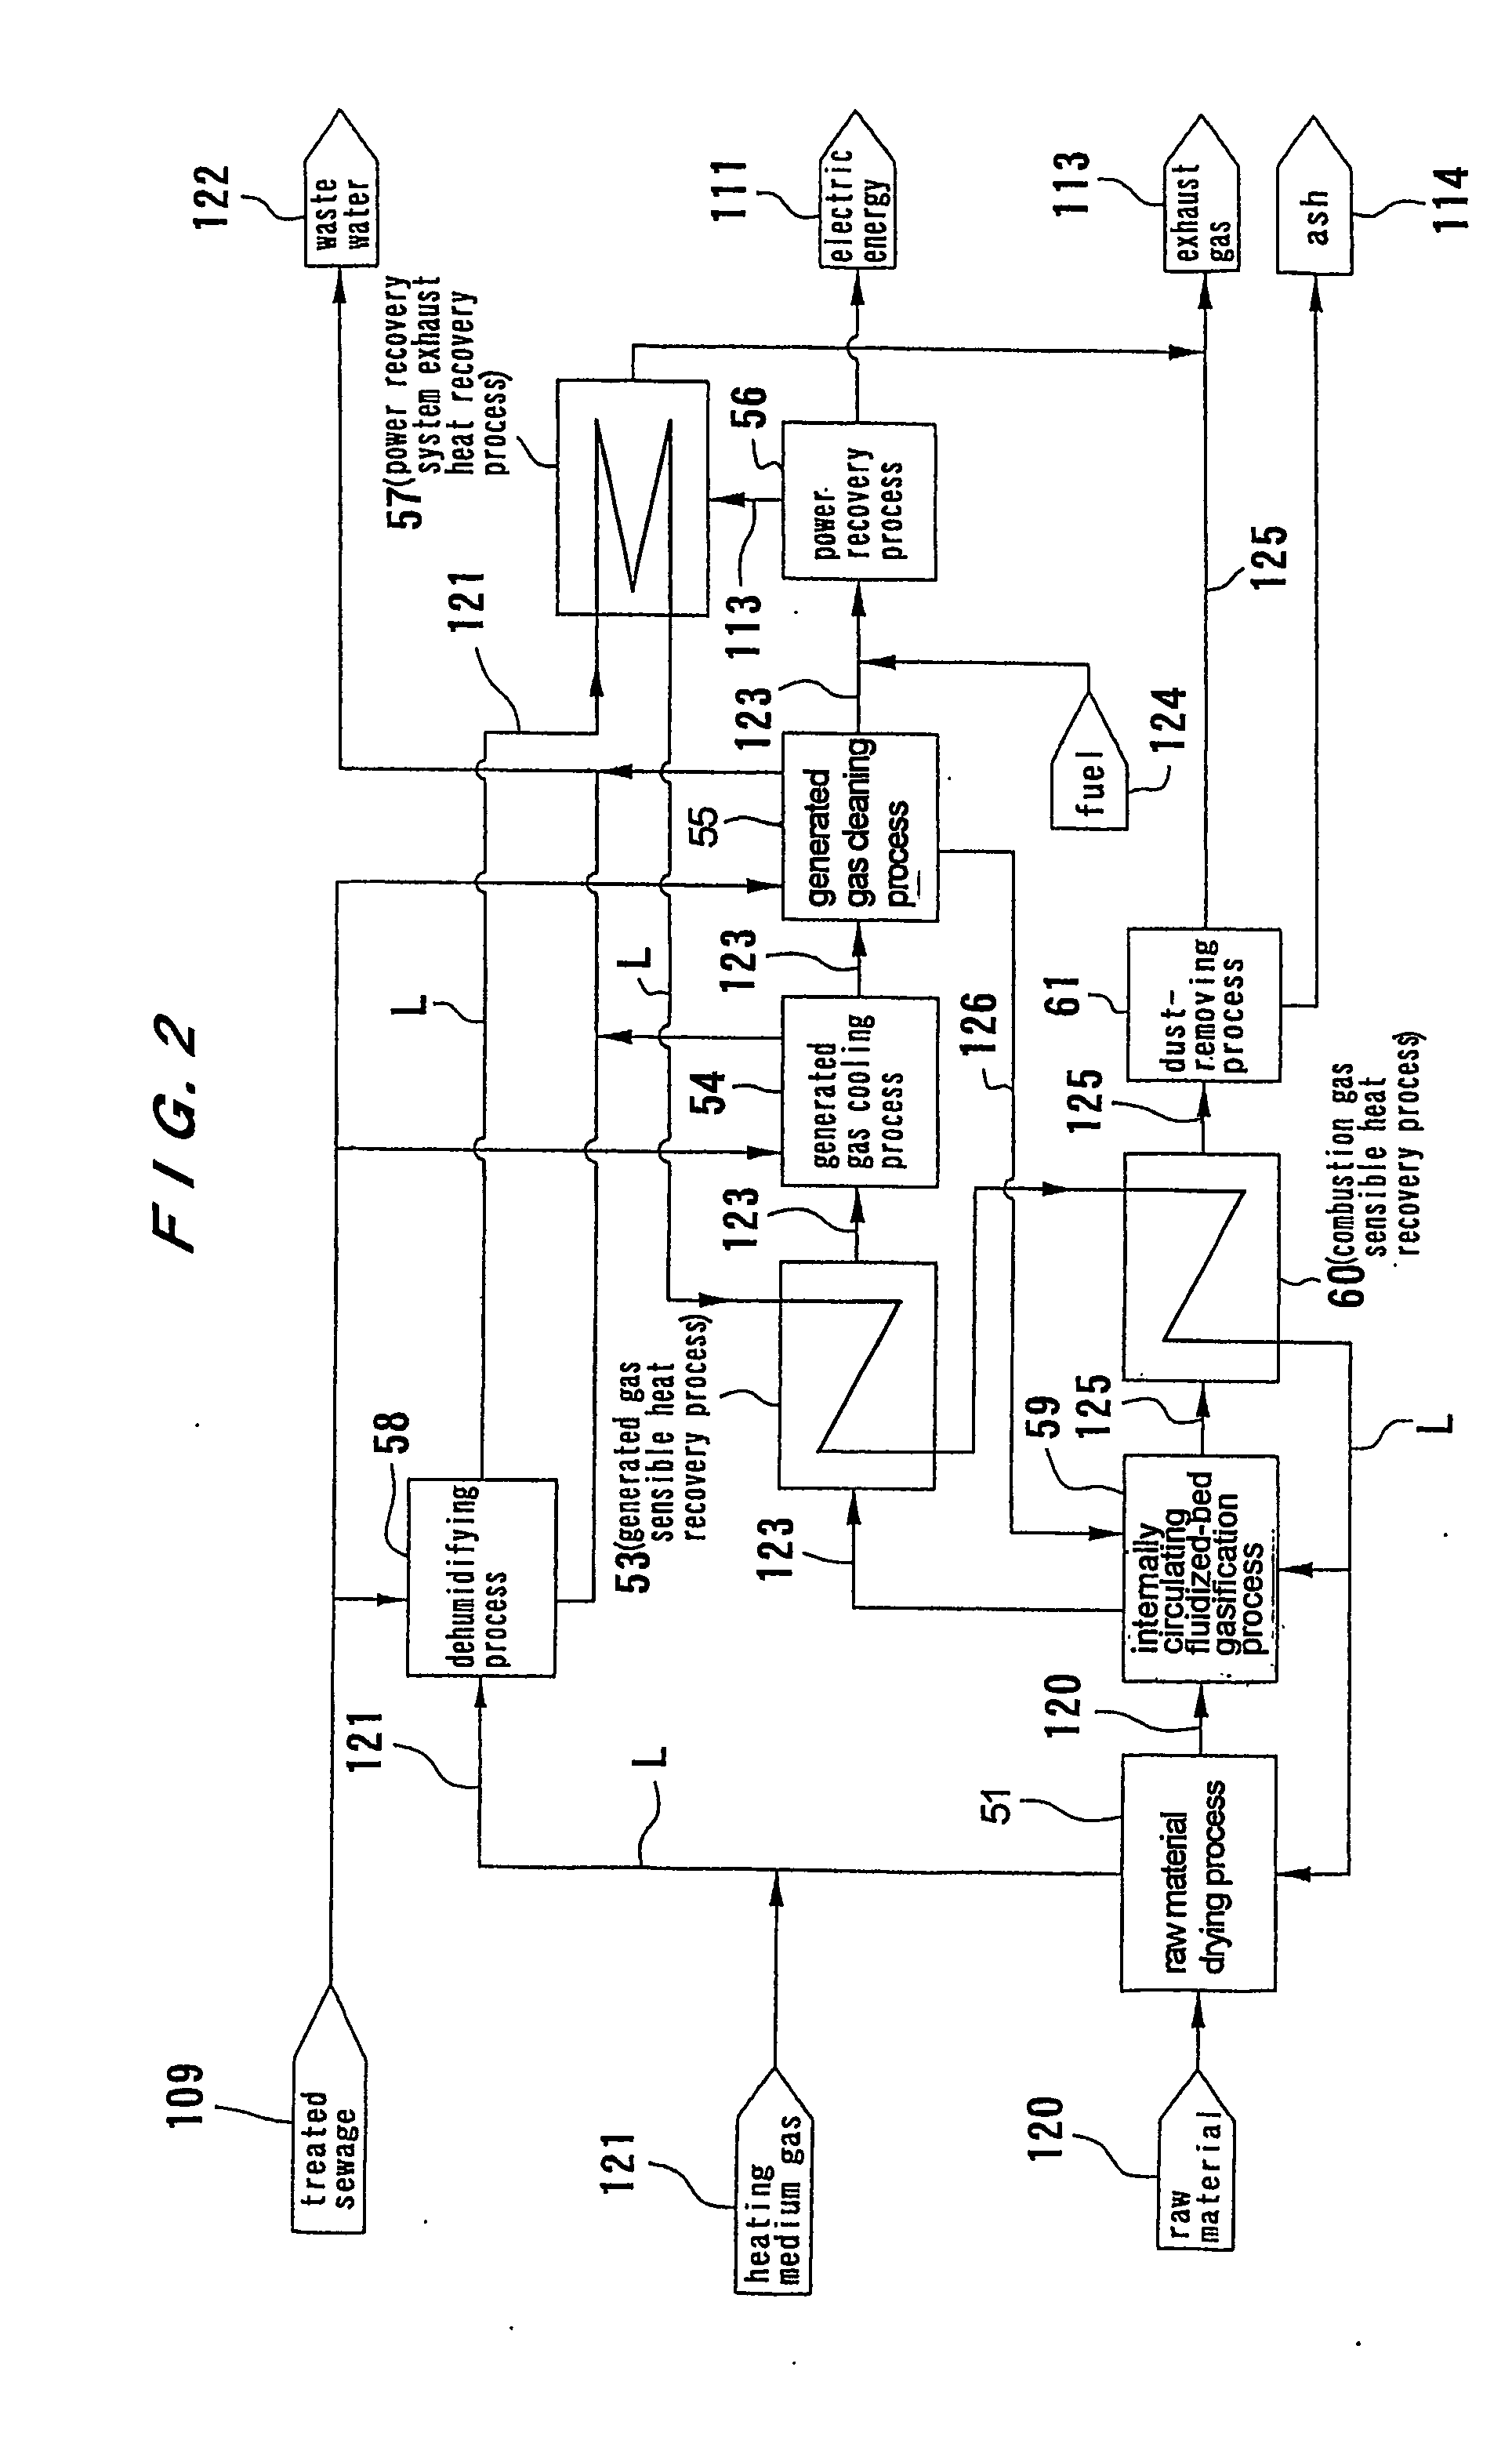 Method and apparatus for treating organic matter